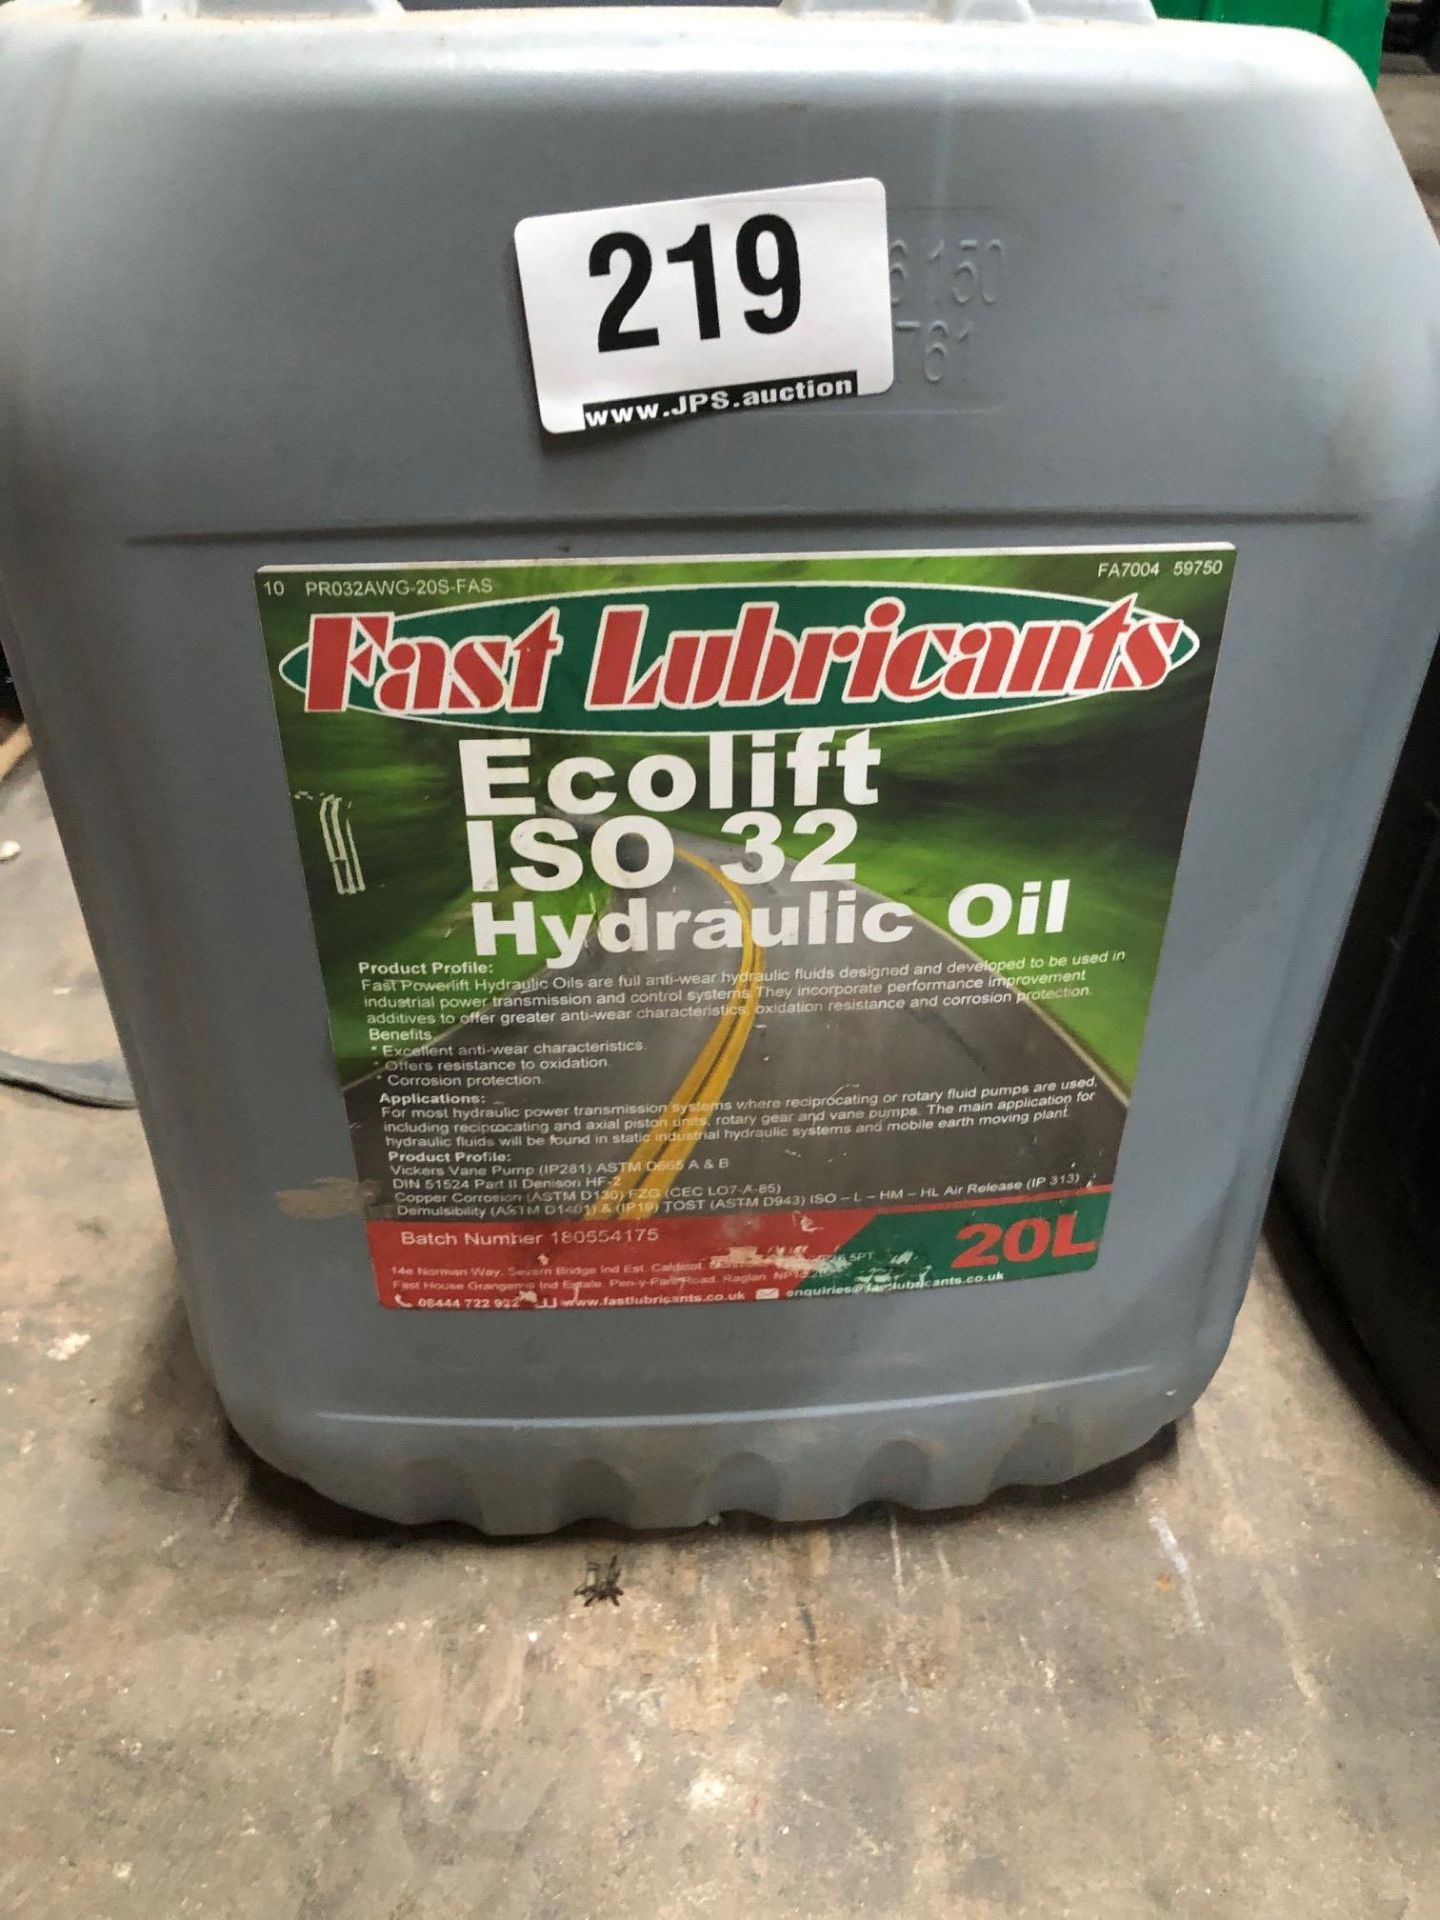 20L Drum of Fast Lubricants Ecolift ISO 32 Hydraulic Oil